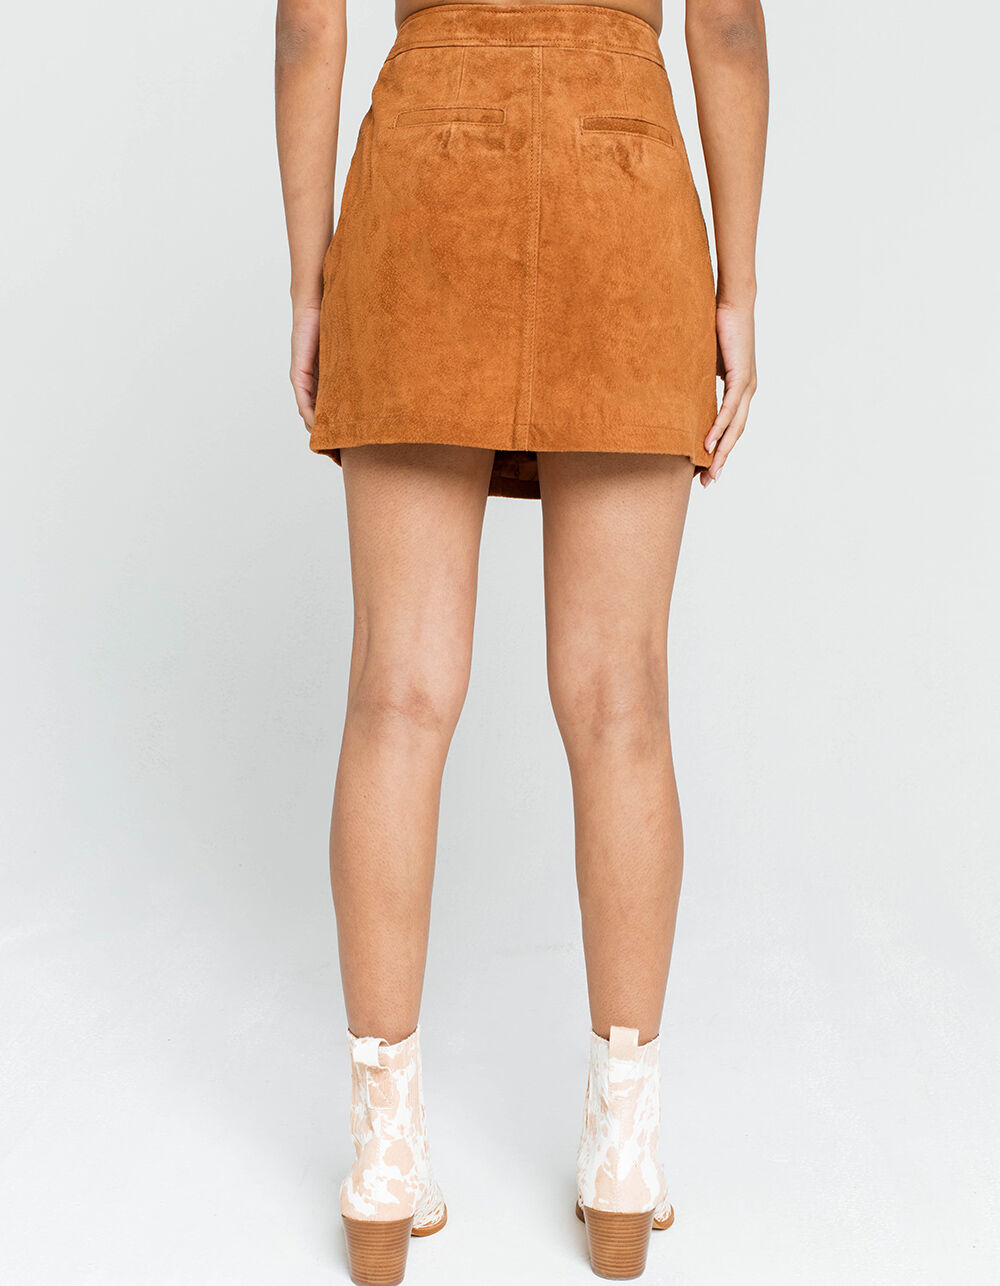 BLANK NYC Moon Child Suede Mini Skirt - CHESTNUT | Tillys